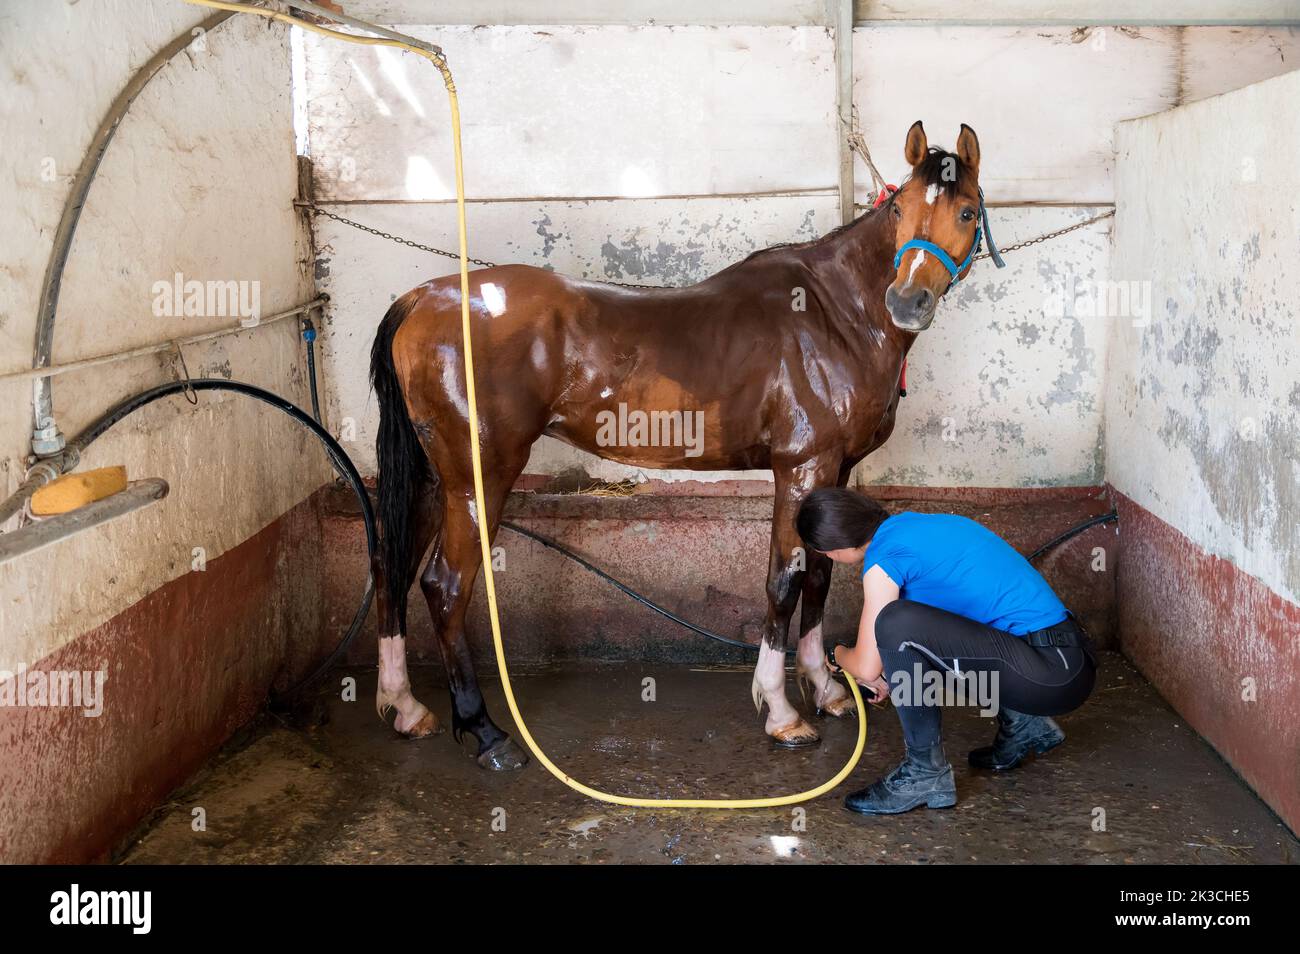 Full body side view of female owner using hose while washing hooves of horse with brown coat during work in barn Stock Photo